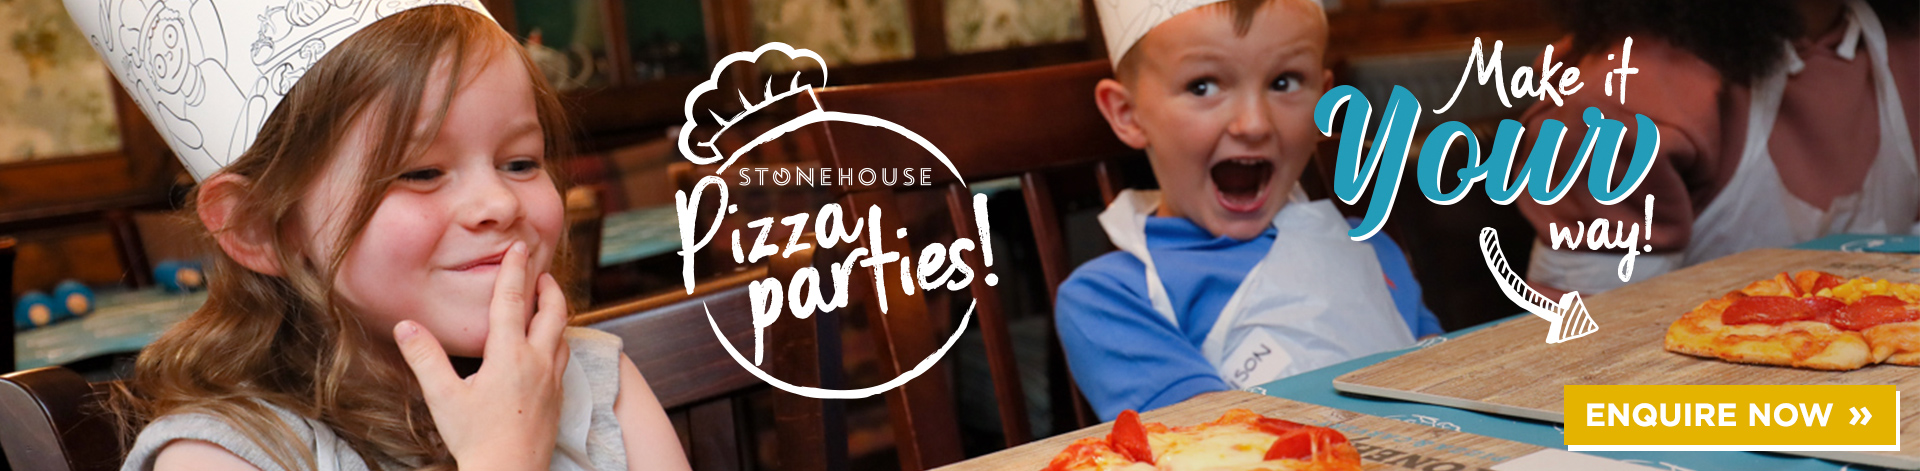 Pizza Parties at Stonehouse Pizza Carvery